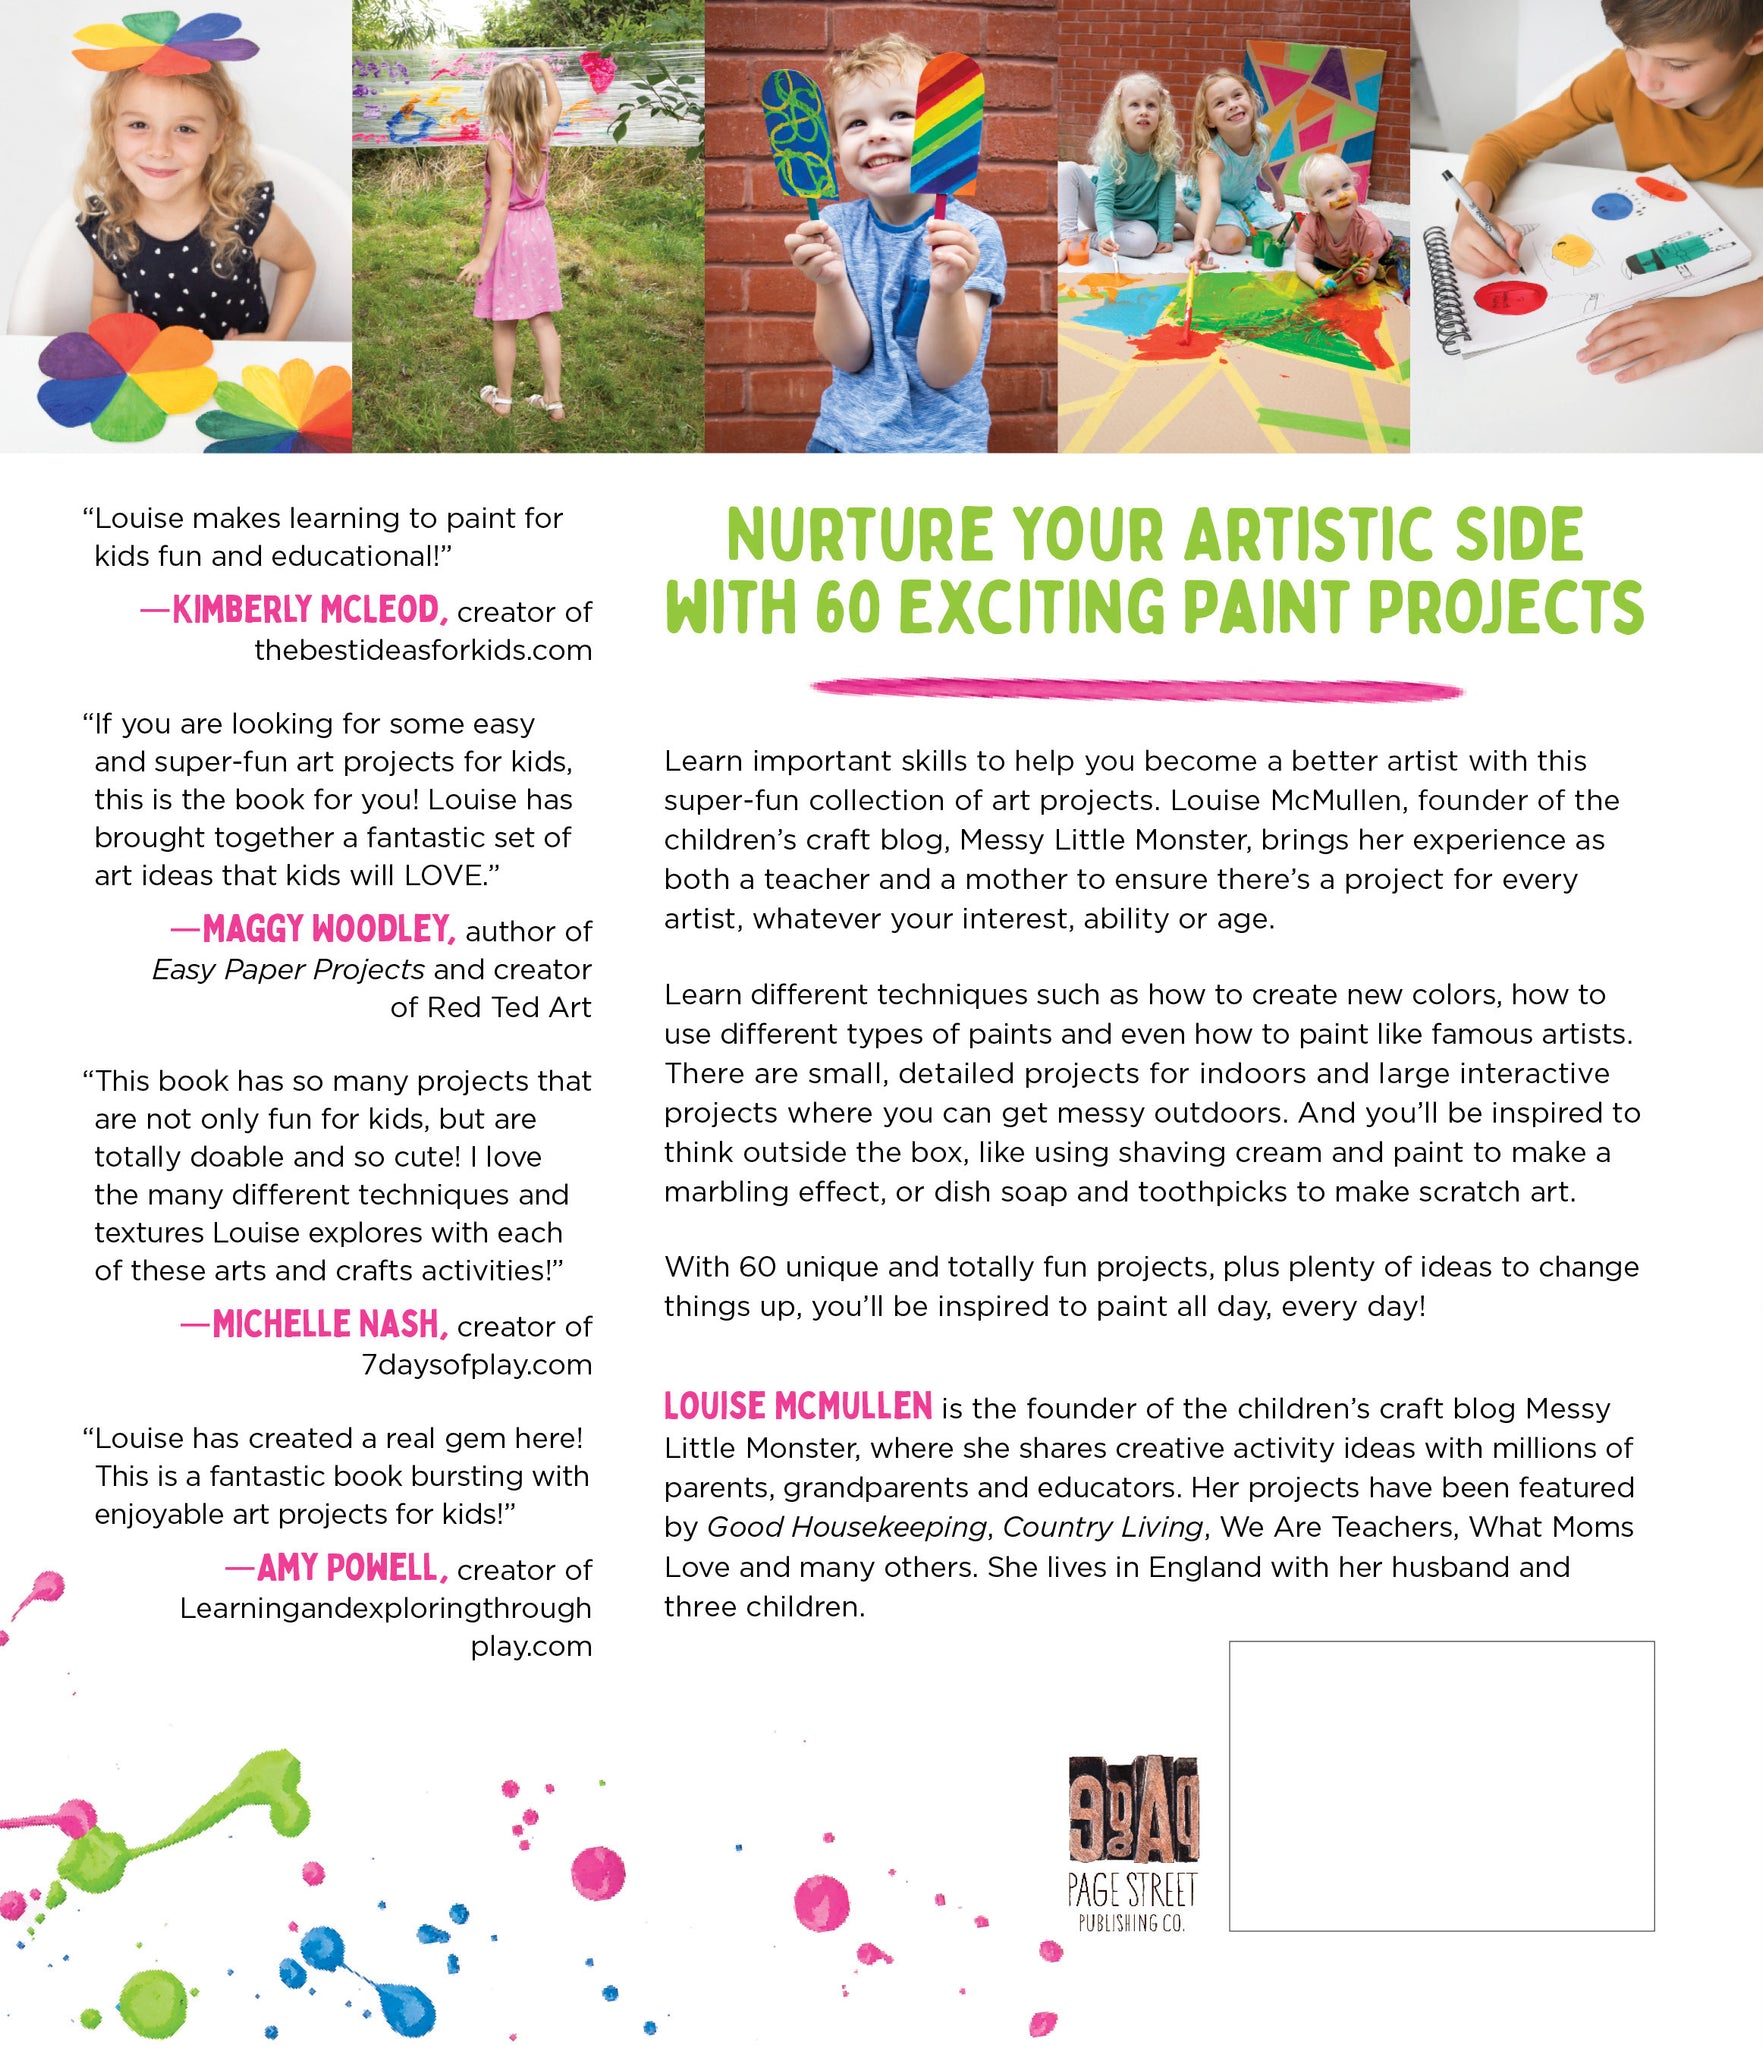 Fun Painting Projects for Kids: 60 Activities to Unleash Your Inner Artist [Book]